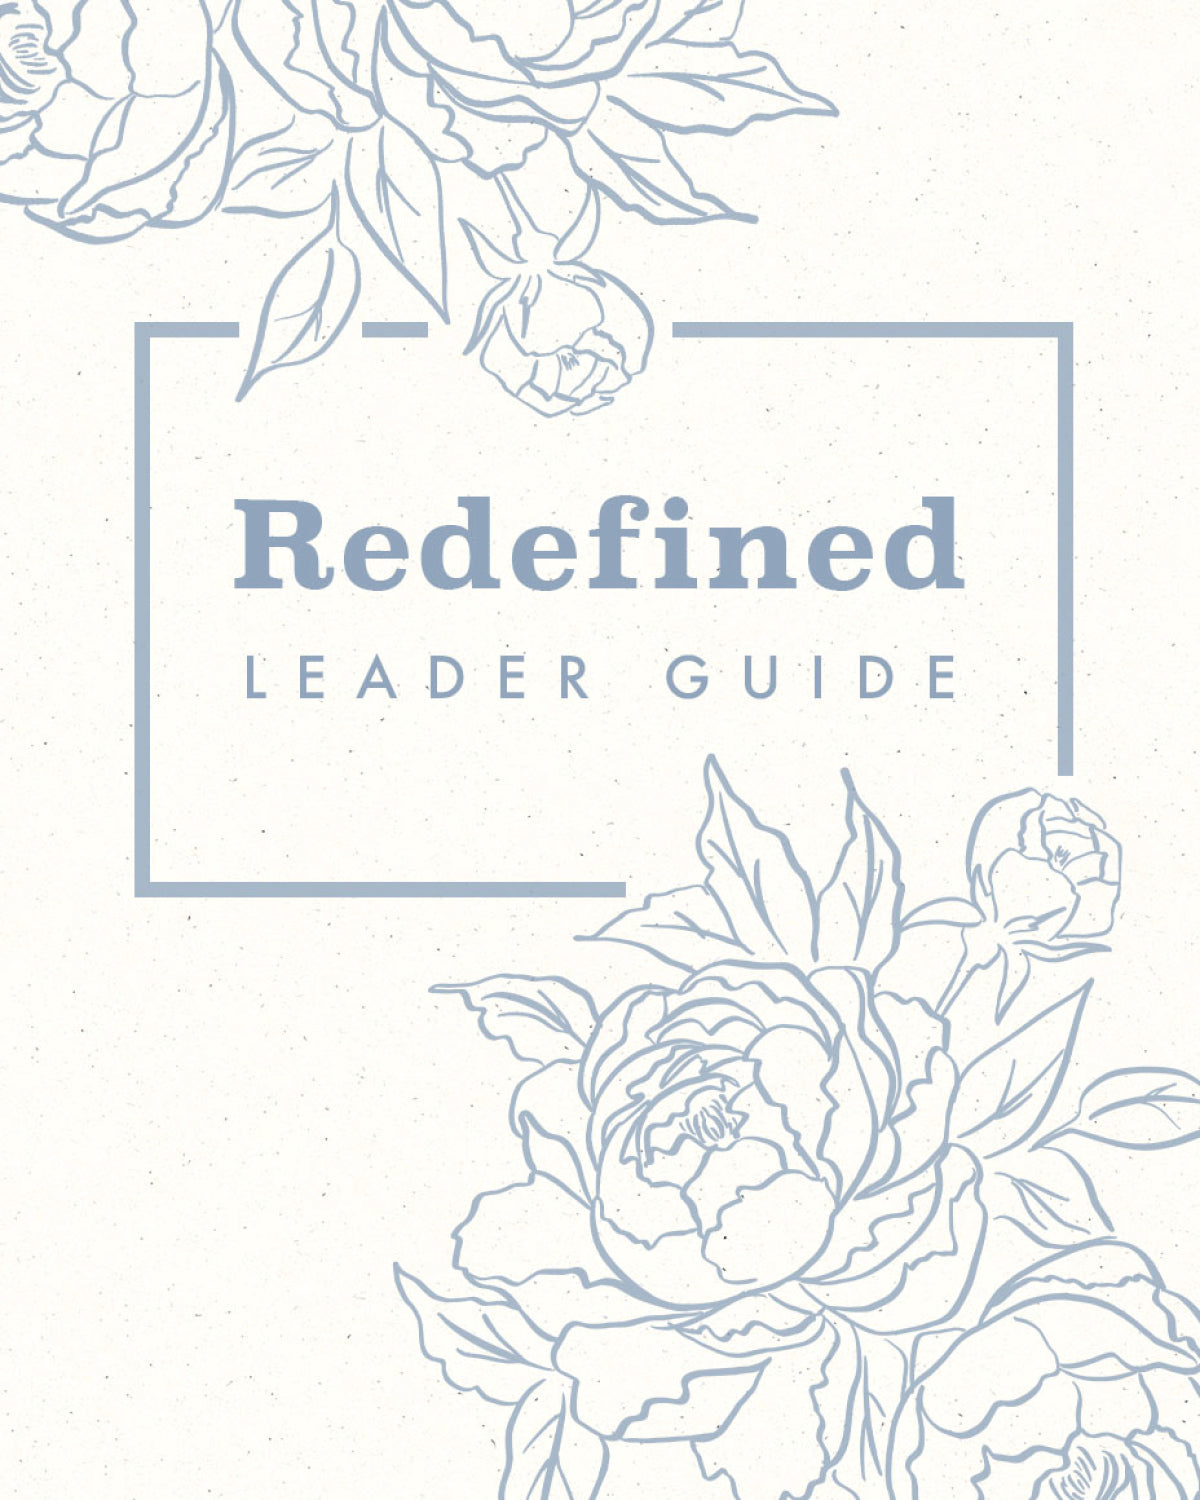 Redefined Leader Guide [FREE PDF]